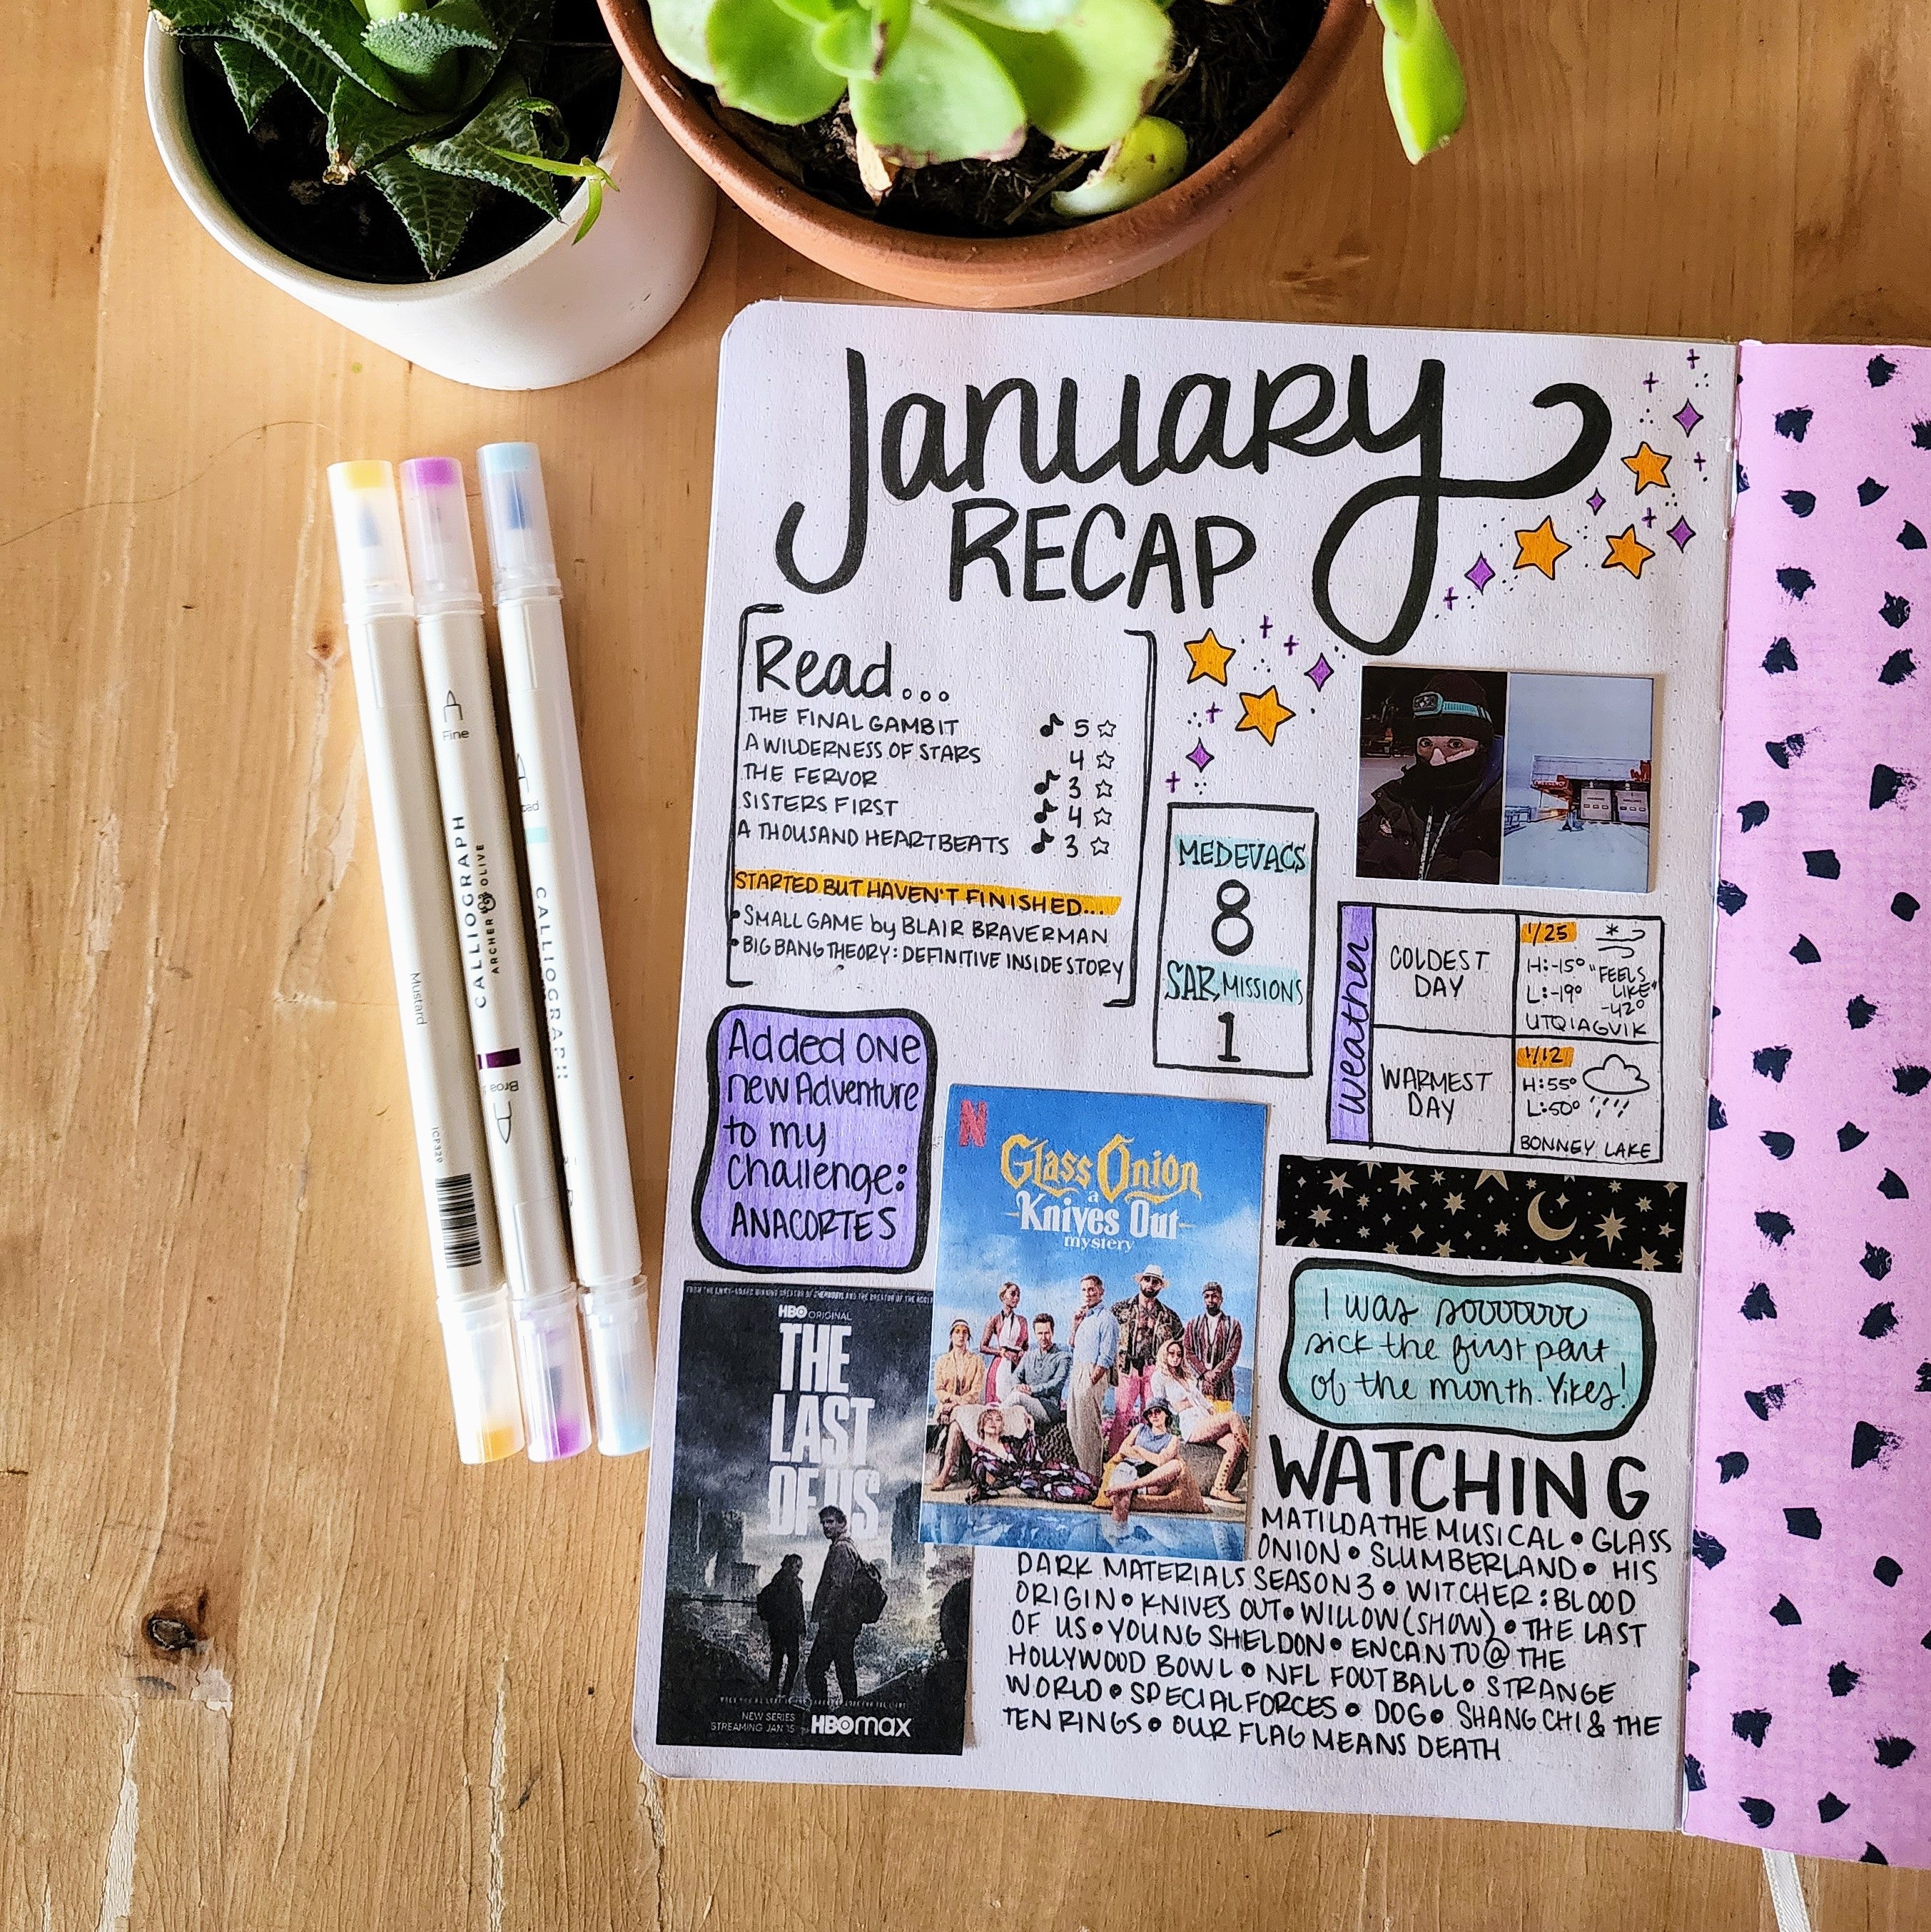 My Minimalist Bullet Journal Supplies // Archer and Olive Review